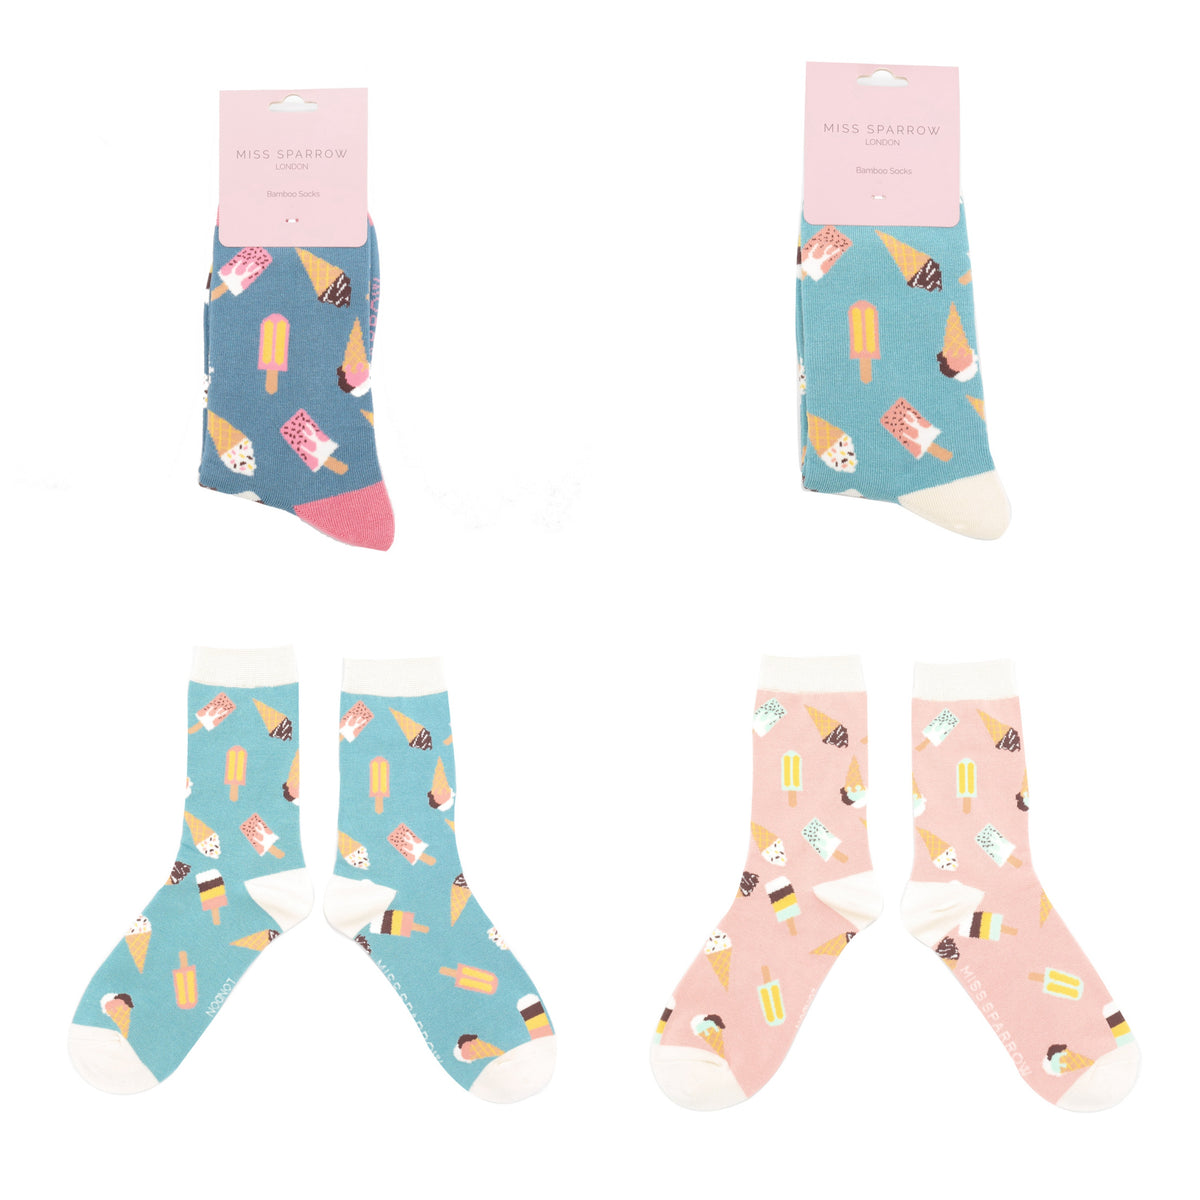 Copy of Miss Sparrow Bamboo Socks for Women - Ice Creams Composite